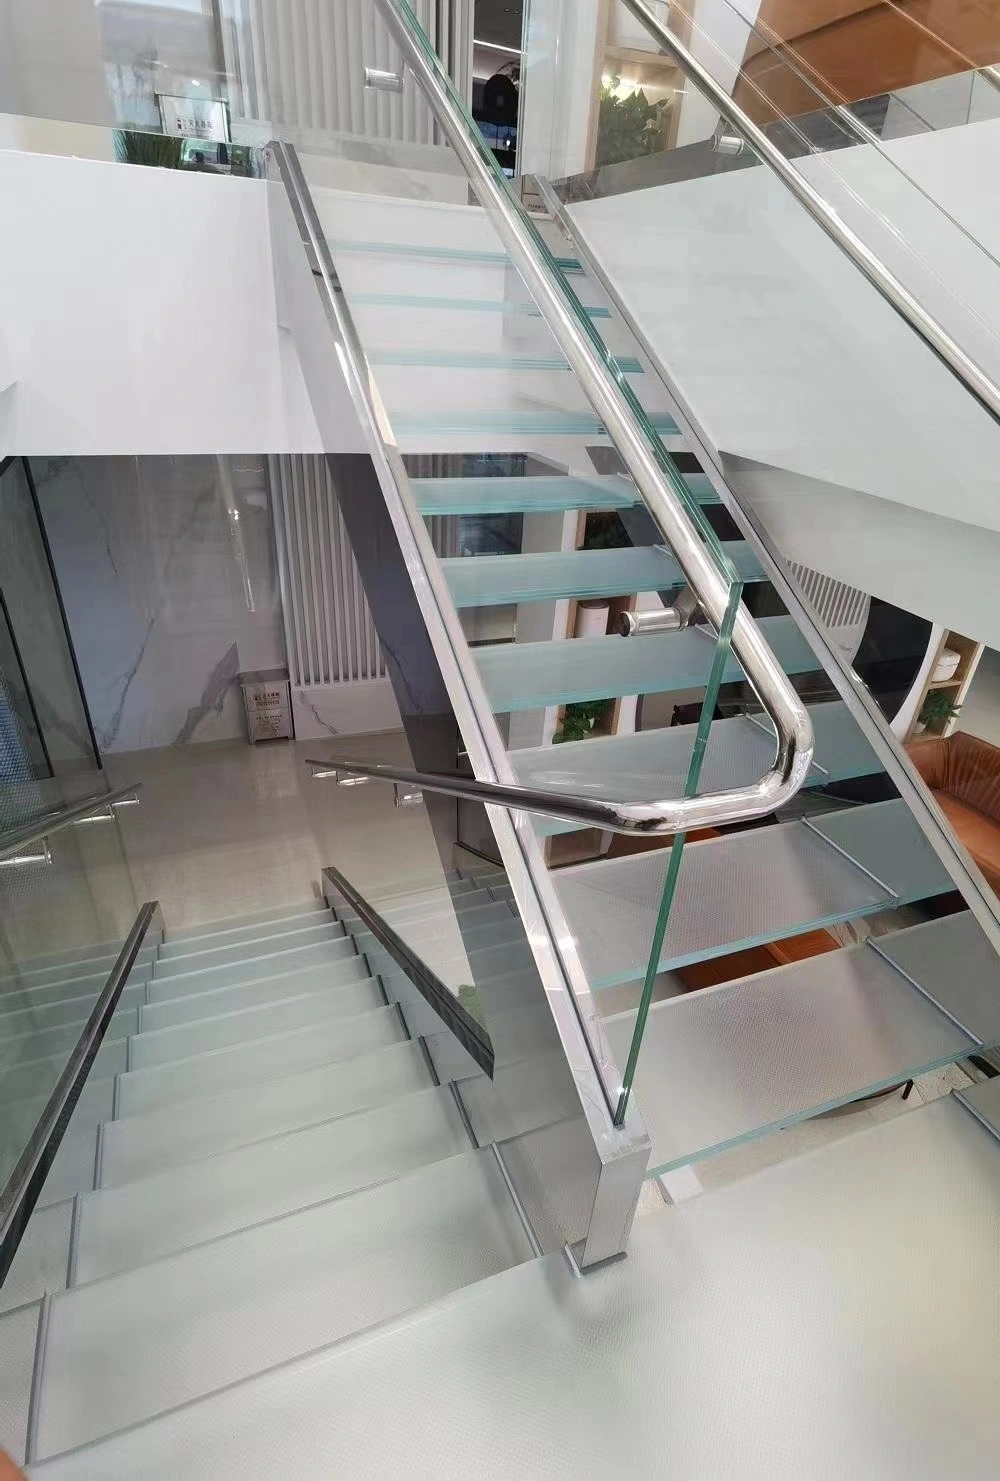 Floor Tread Acid-Etched Tempered/Toughened Safety Laminated Bulidng Glass